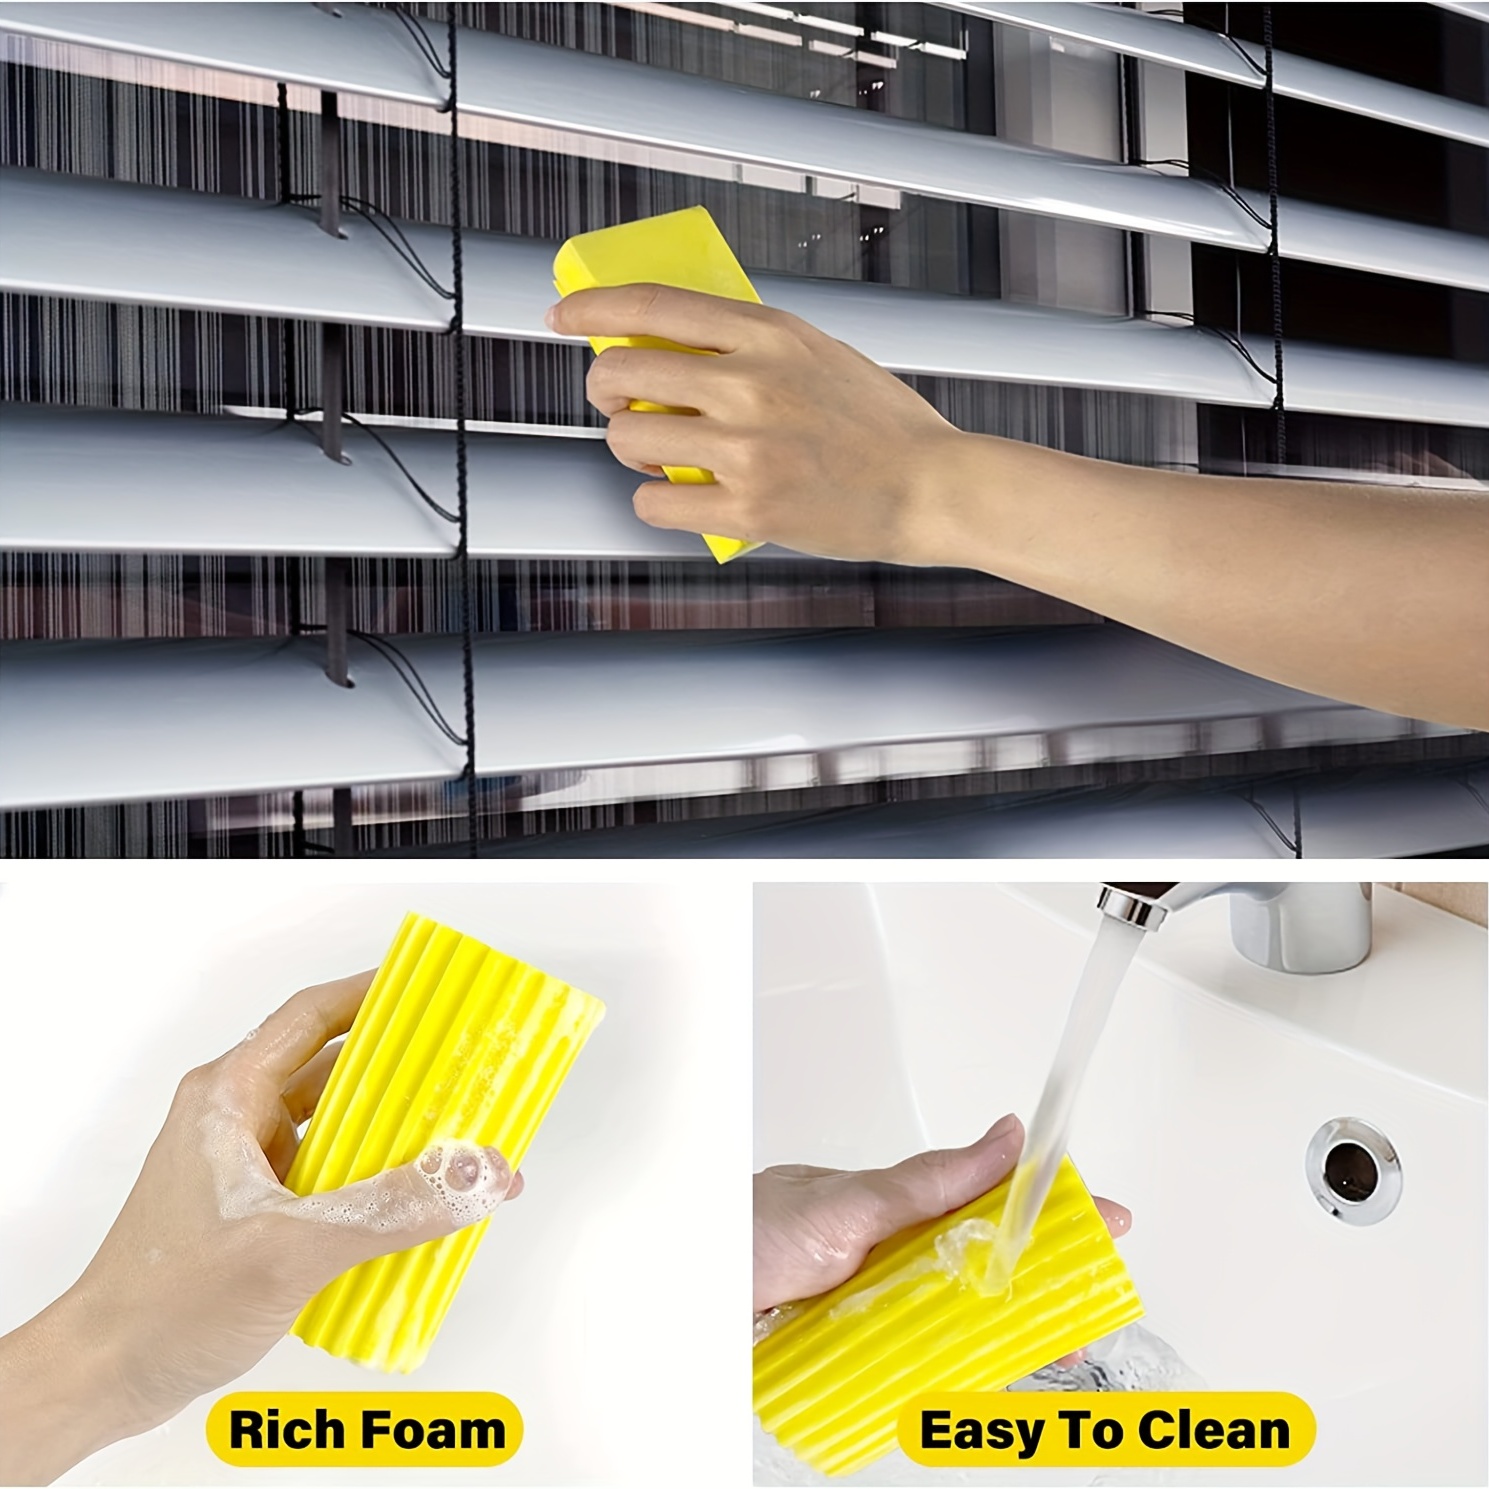 1pcs, Damp Clean Duster Sponge, Sponge Cleaning Brush, Duster For Cleaning  Blinds, Glass, Baseboards, Vents, Railings, Mirrors, Window Track Grooves  And Faucets